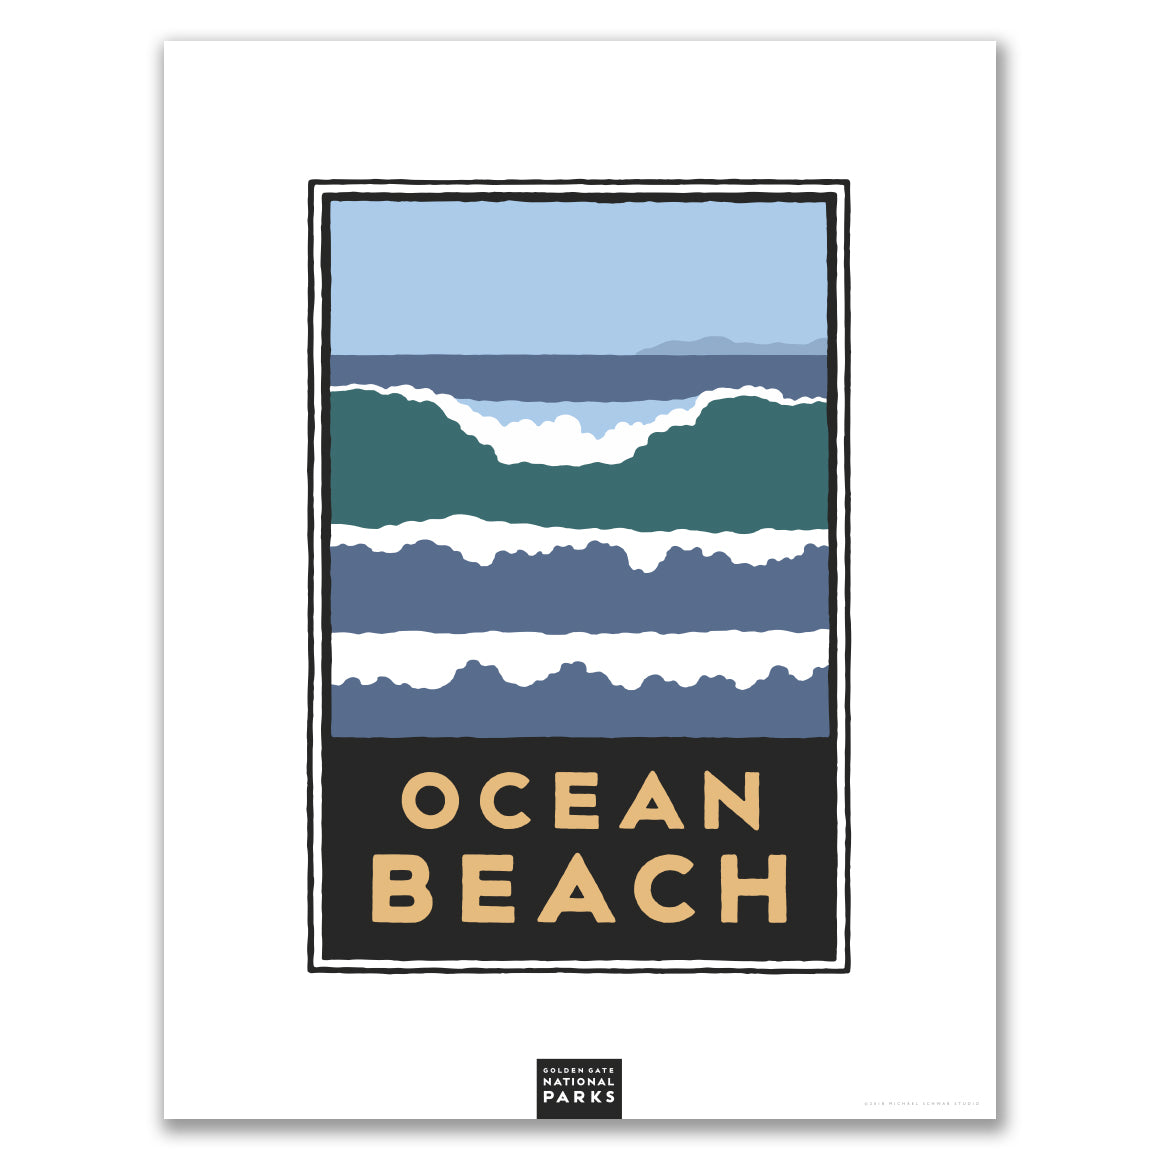 Multicolor Ocean Beach giclee poster print, with art by Michael Schwab